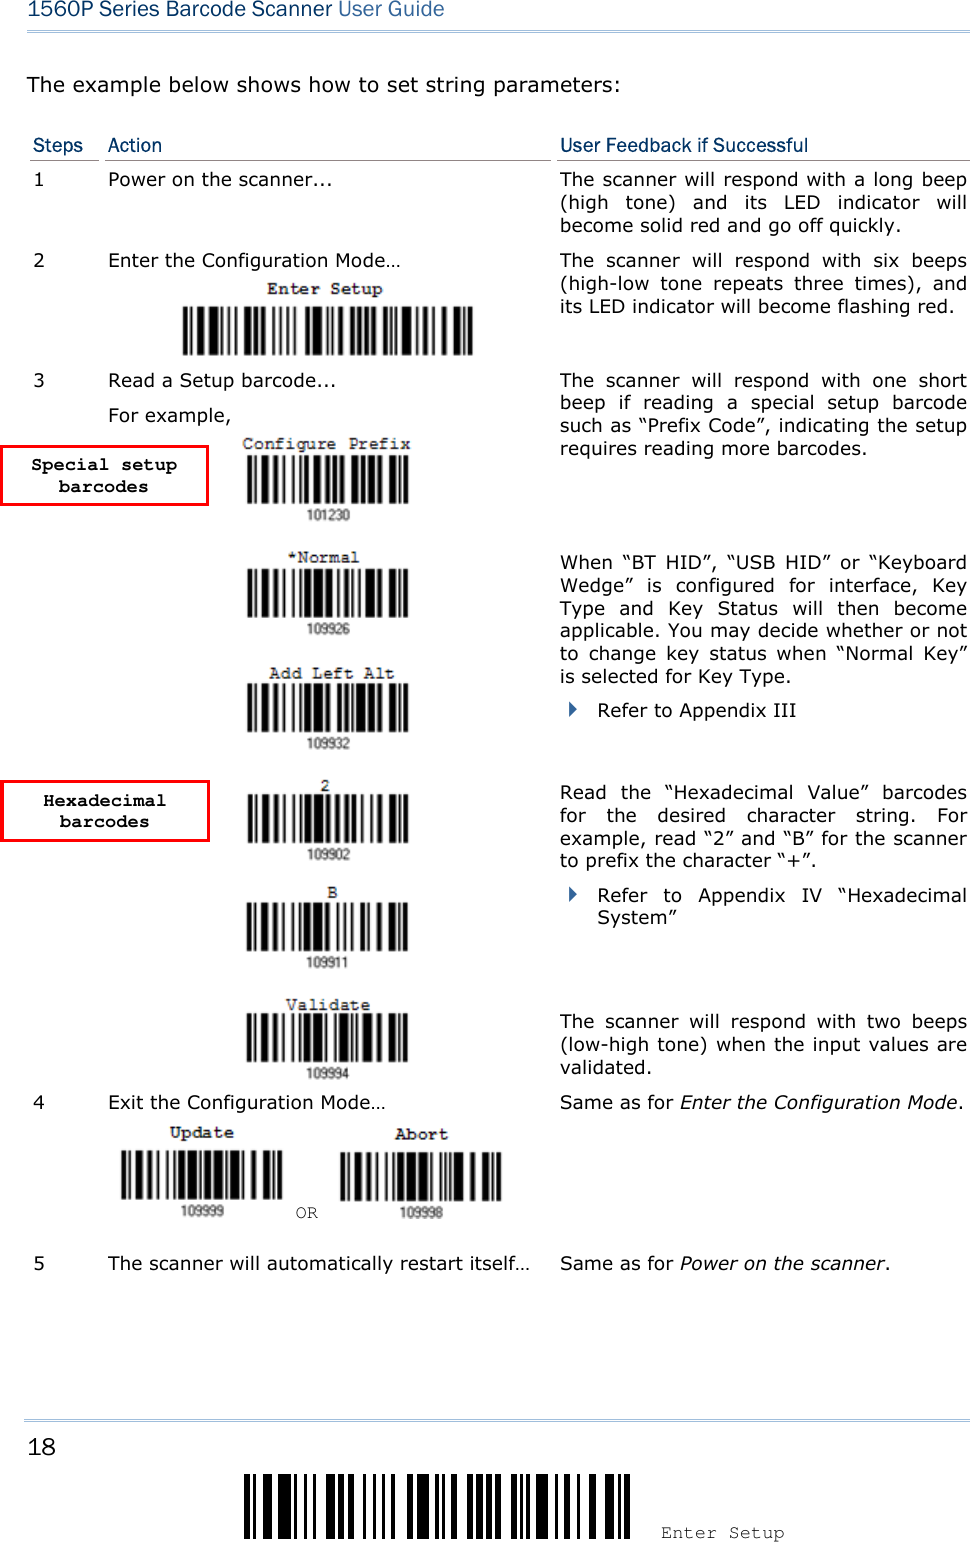 18 Enter Setup 1560P Series Barcode Scanner User Guide The example below shows how to set string parameters: Steps  Action  User Feedback if Successful 1  Power on the scanner...  The scanner will respond with a long beep (high  tone)  and  its  LED  indicator  will become solid red and go off quickly. 2  Enter the Configuration Mode… The  scanner  will  respond  with  six  beeps (high-low  tone  repeats  three  times),  and its LED indicator will become flashing red. 3  Read a Setup barcode... For example, The  scanner  will  respond  with  one  short beep  if  reading  a  special  setup  barcode such as “Prefix Code”, indicating the setup requires reading more barcodes.   When  “BT  HID”,  “USB  HID”  or  “Keyboard Wedge” is  configured  for  interface,  Key Type  and  Key  Status  will  then  become applicable. You may decide whether or not to  change  key  status when  “Normal  Key” is selected for Key Type. Refer to Appendix IIIRead  the  “Hexadecimal  Value”  barcodes for  the  desired  character  string.  For example, read “2” and “B” for the scanner to prefix the character “+”. Refer  to  Appendix  IV “HexadecimalSystem”The  scanner  will  respond  with  two  beeps (low-high tone) when the input values are validated. 4  Exit the Configuration Mode…  OR Same as for Enter the Configuration Mode. 5  The scanner will automatically restart itself…  Same as for Power on the scanner. Hexadecimal barcodes Special setup barcodes 